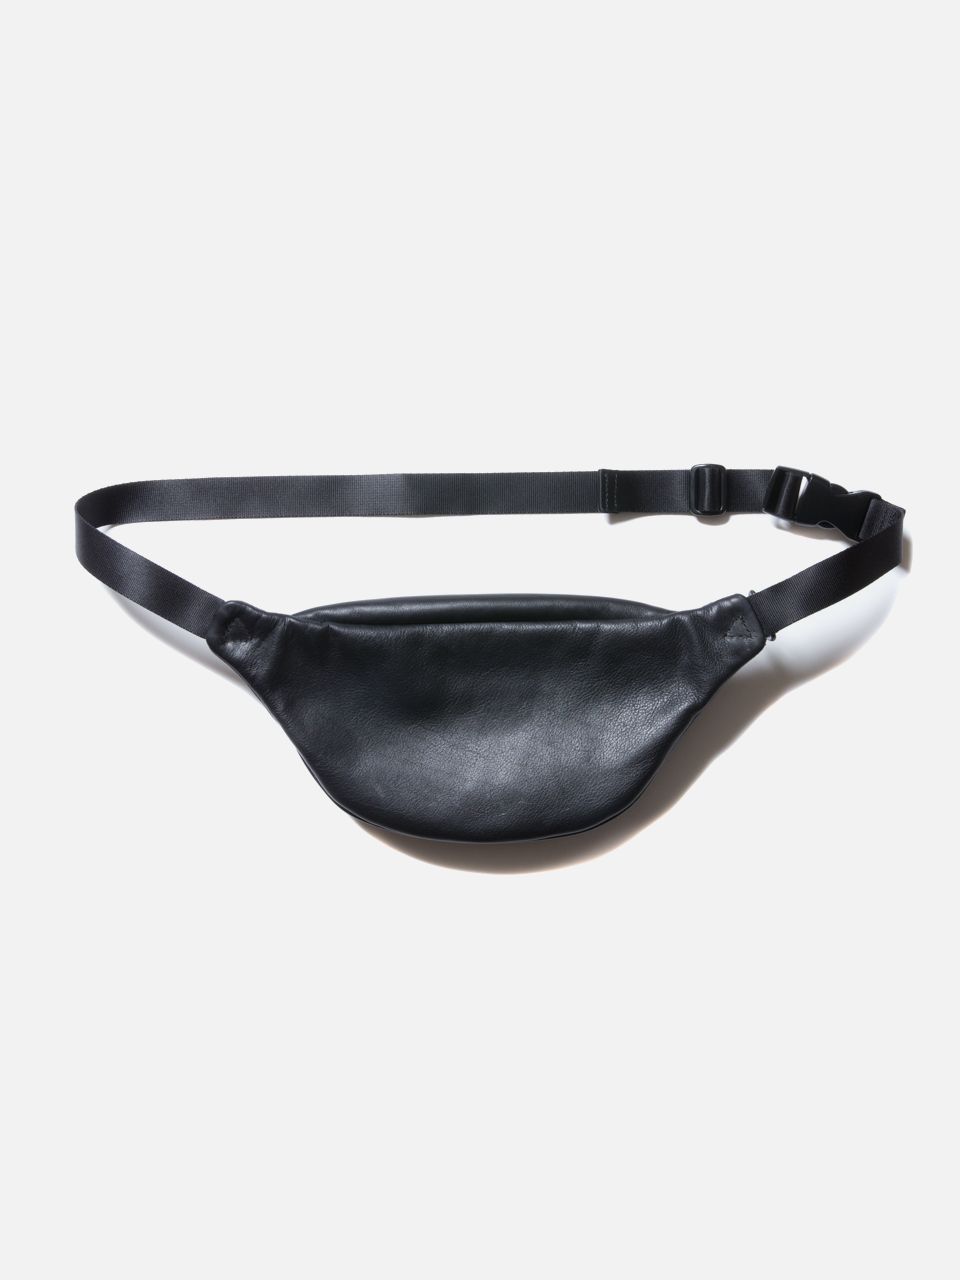 COOTIE クーティ 通販 19SS Leather Waist Pack